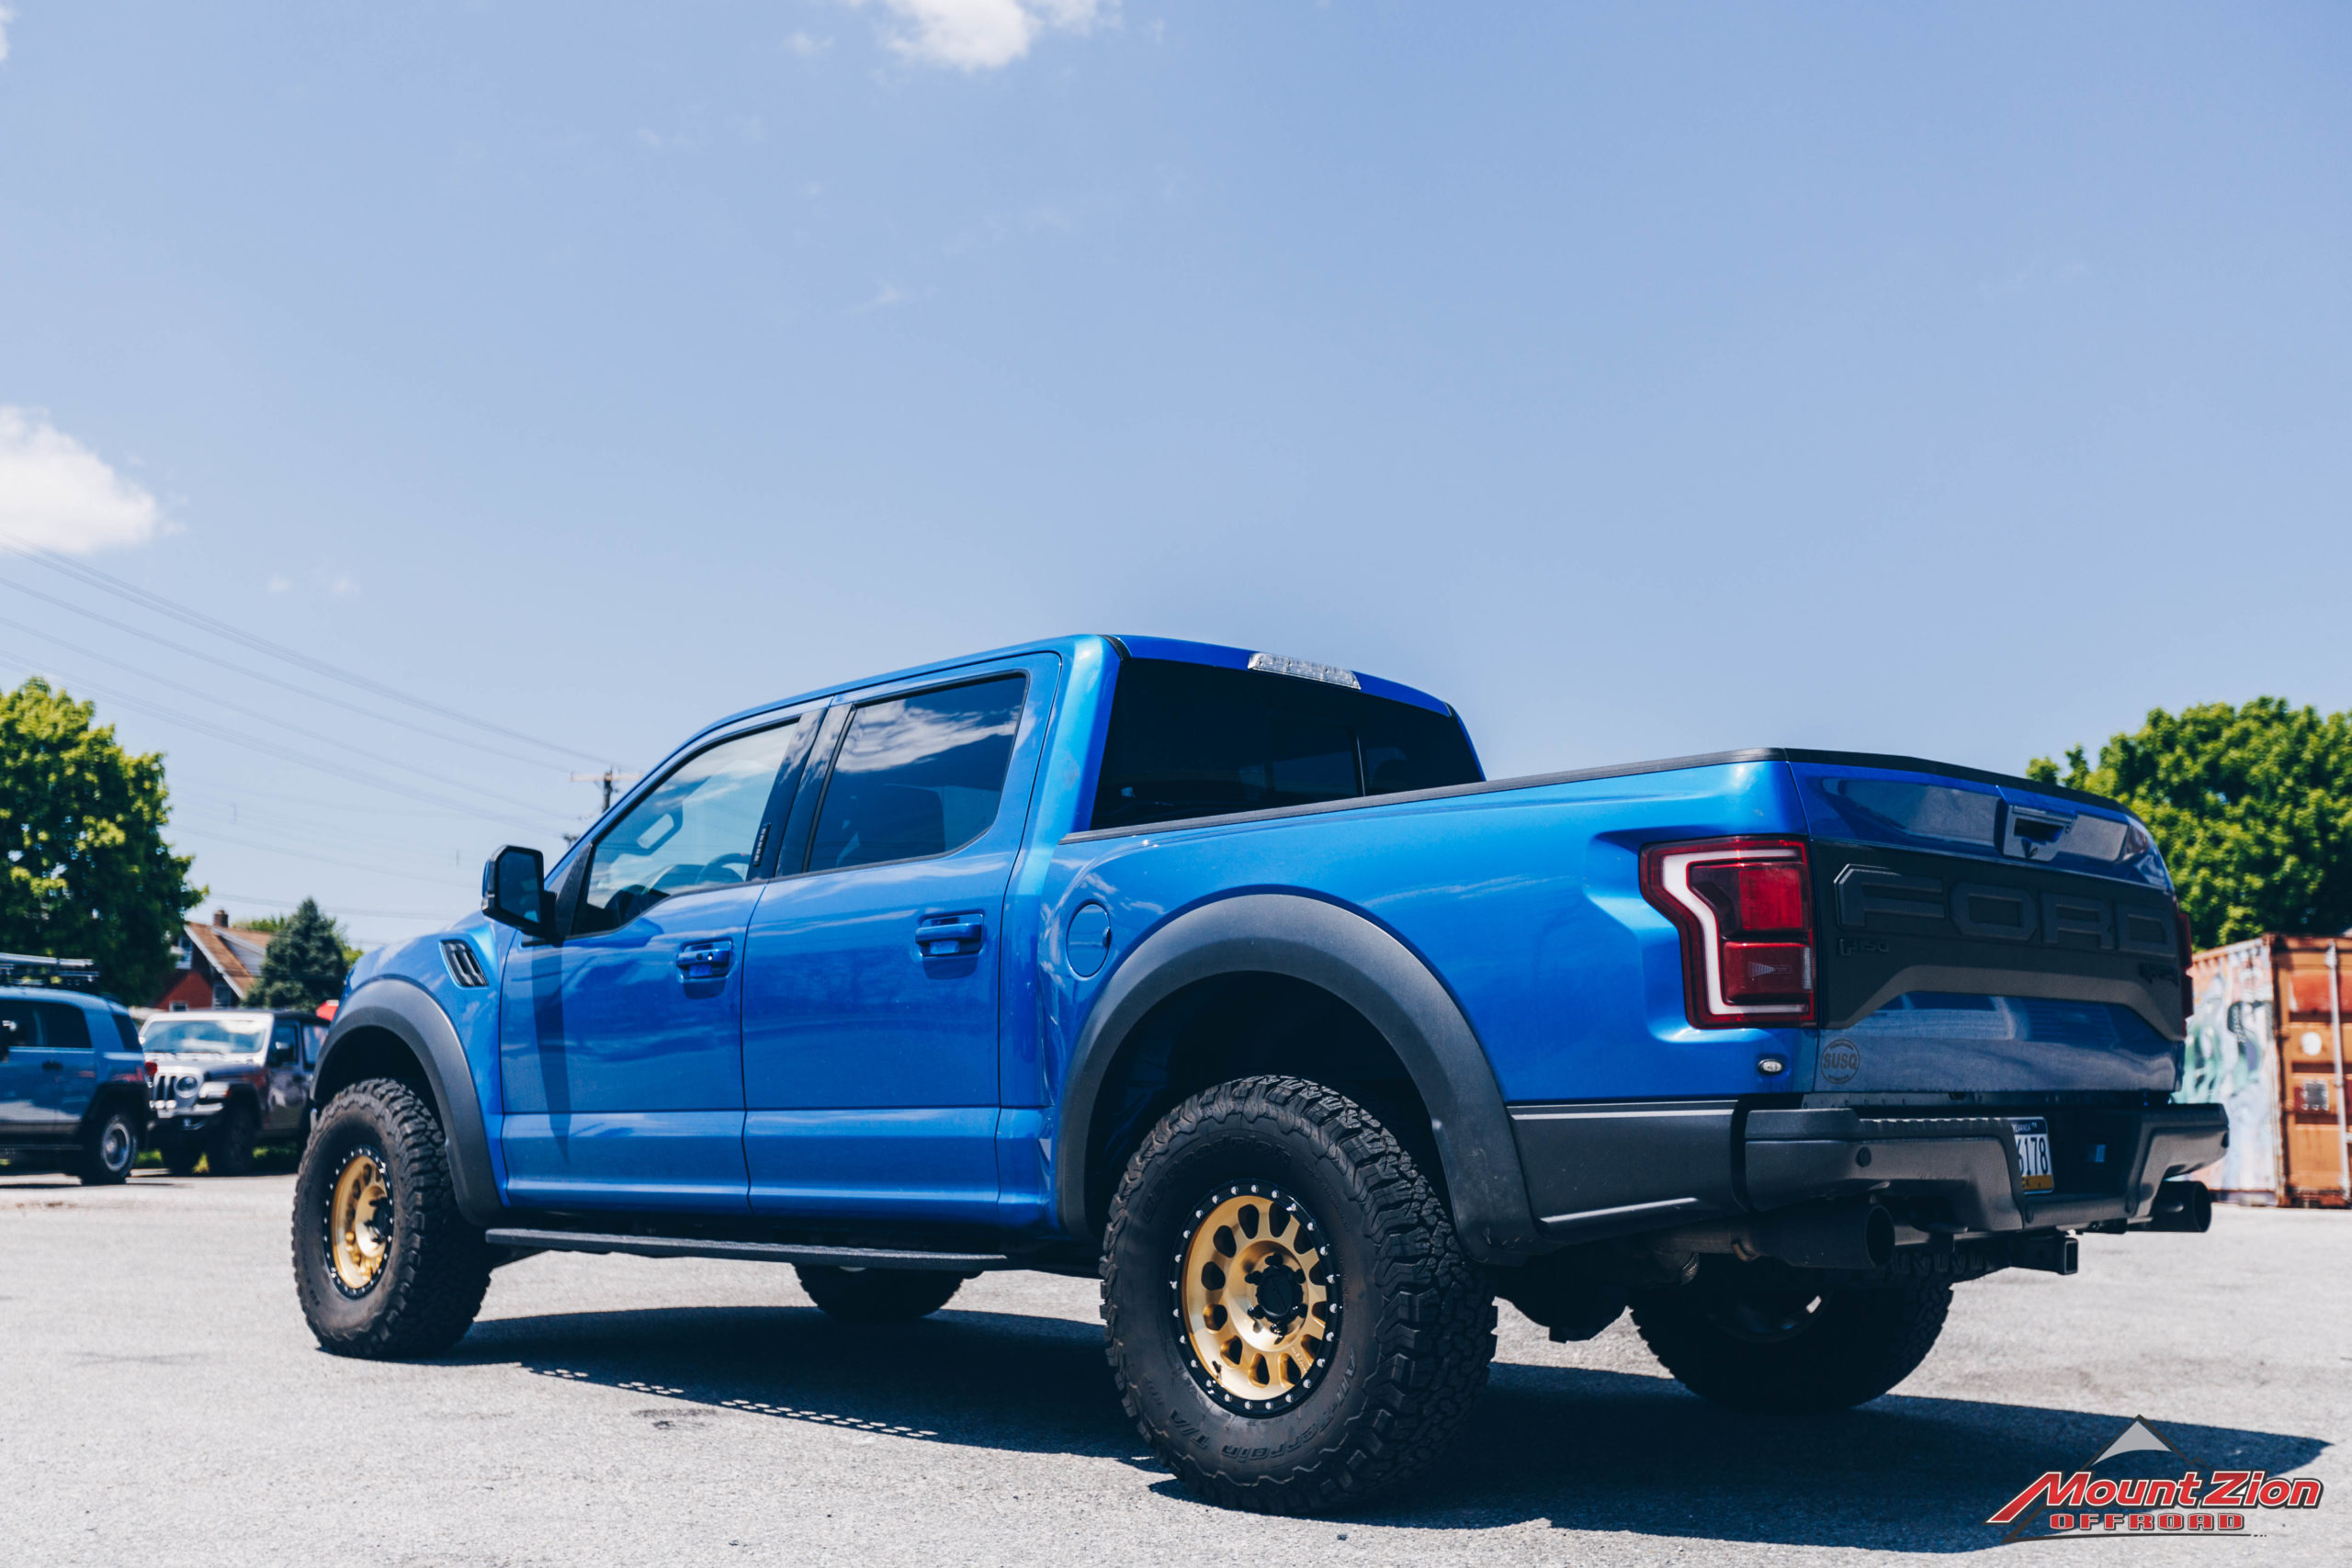 2020 Ford F-150 Raptor - Mount Zion Offroad